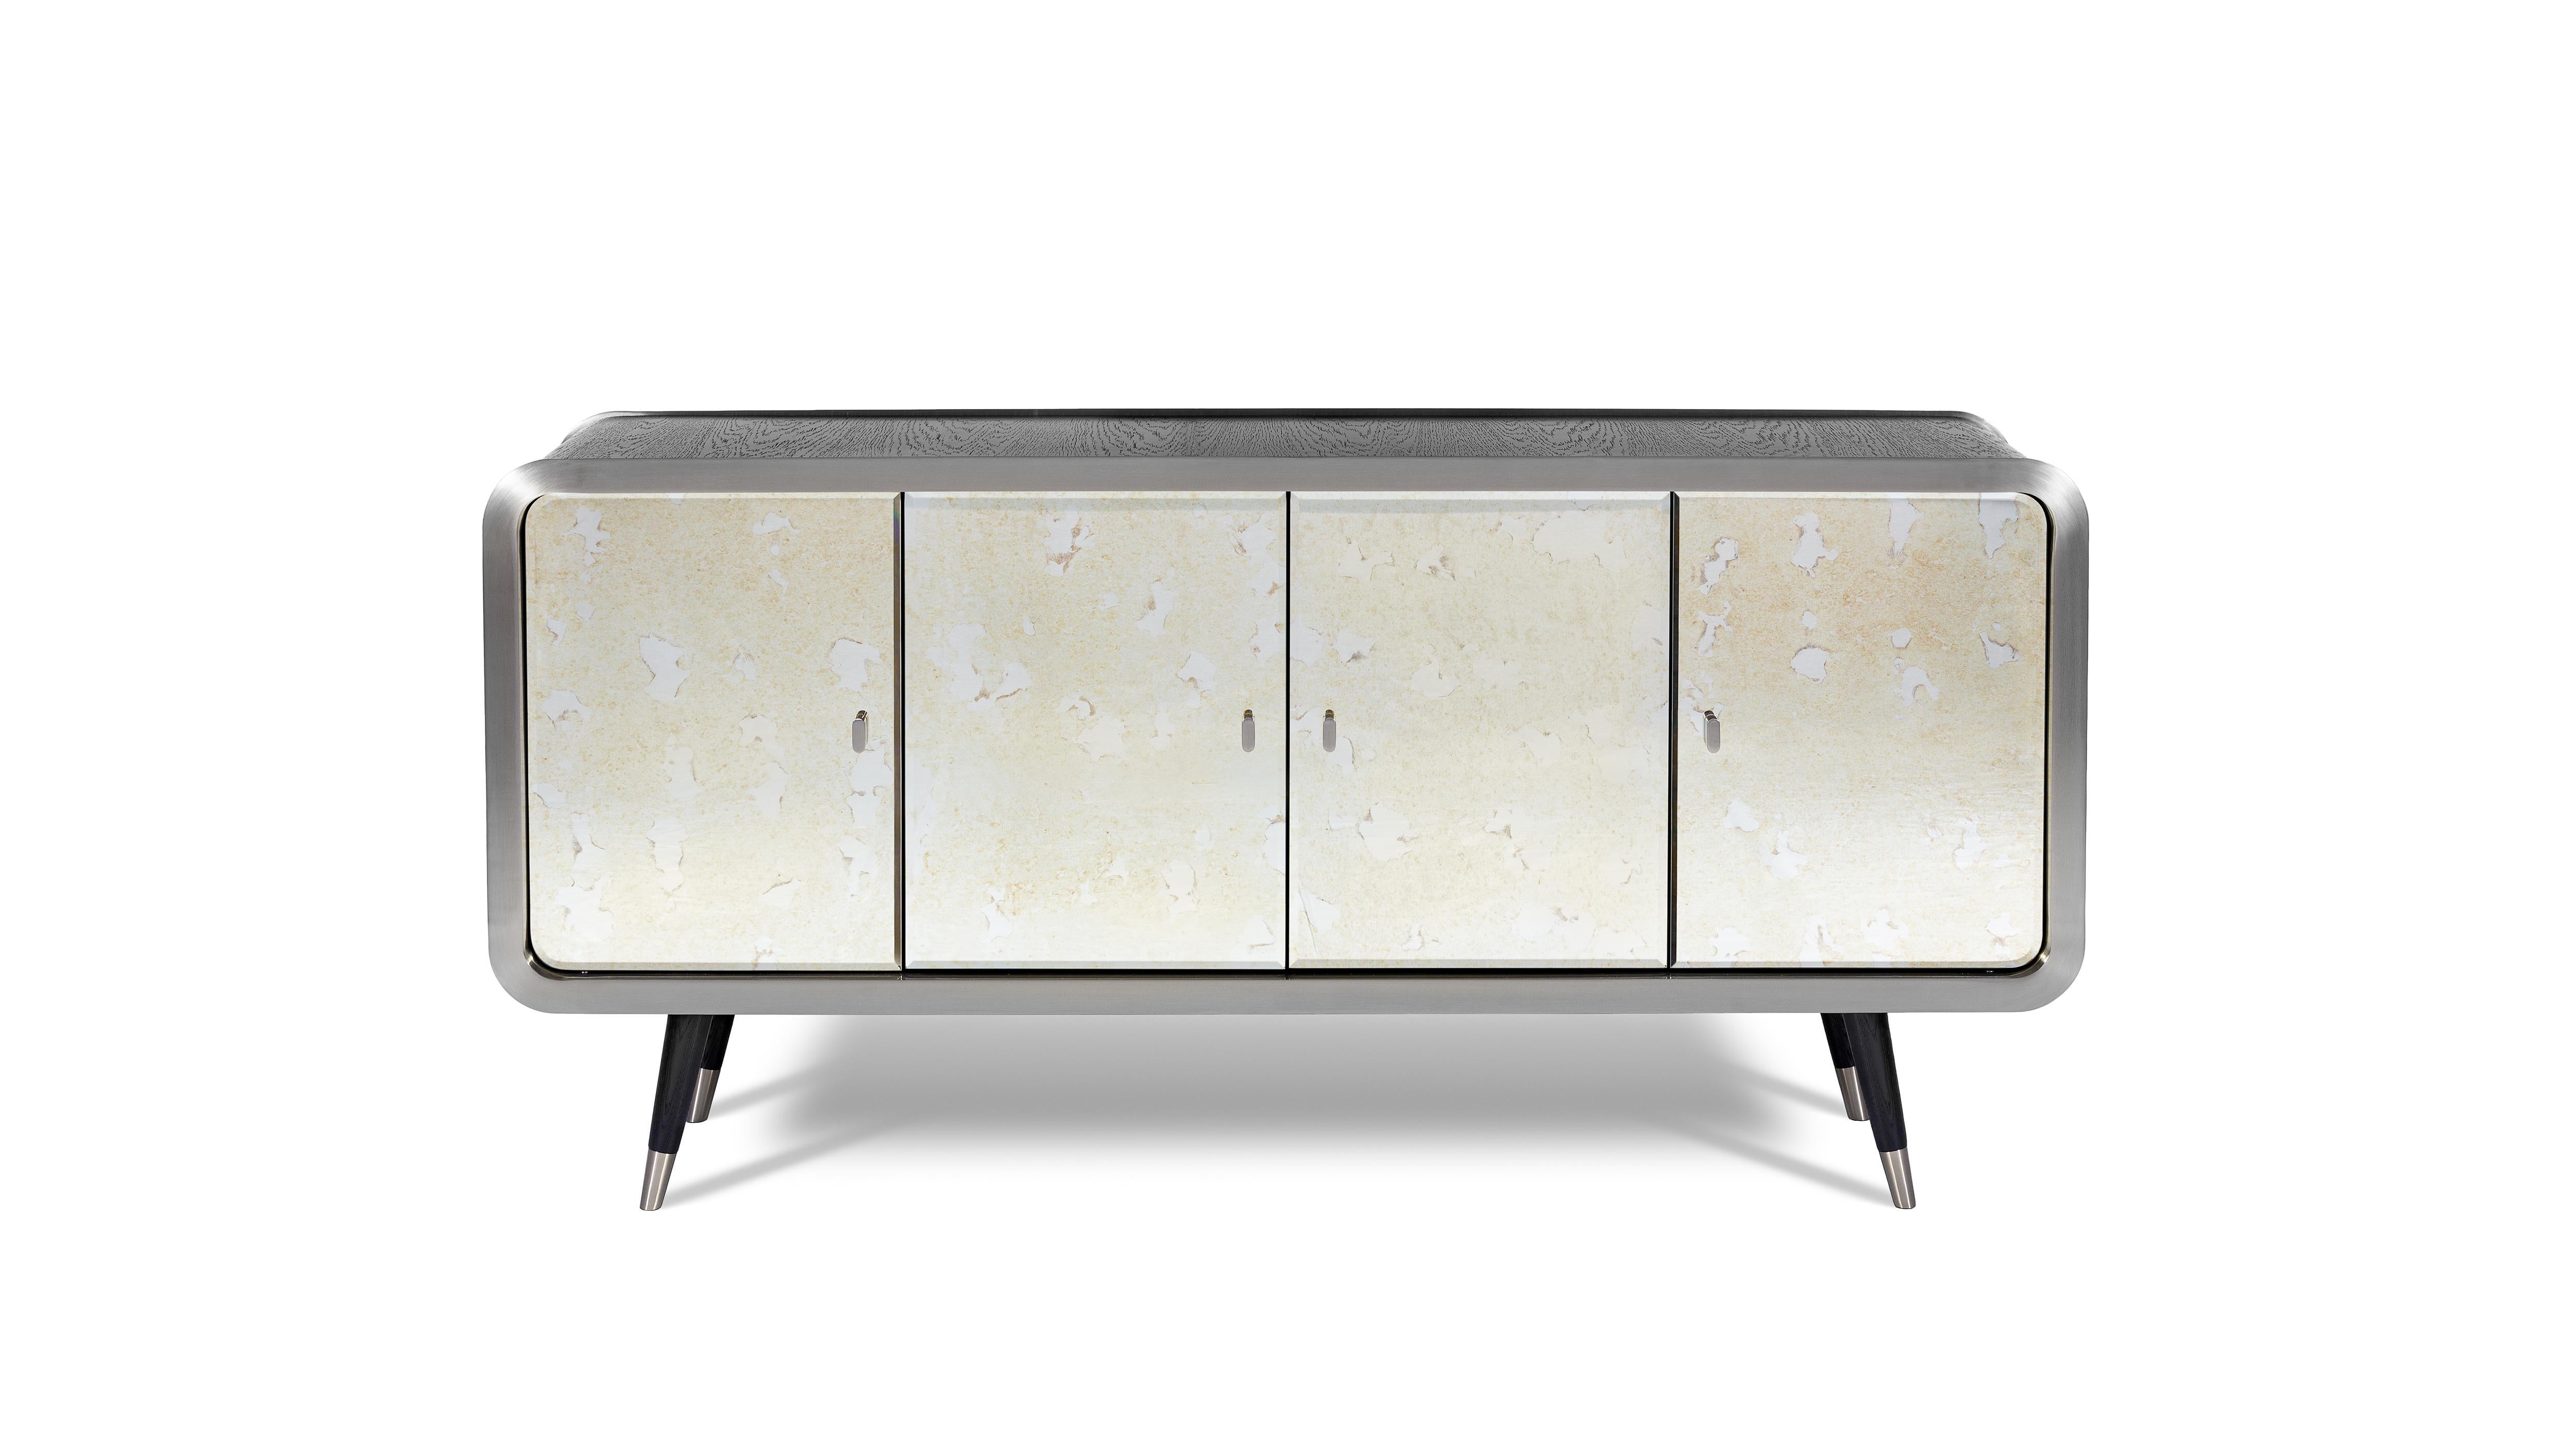 Unveil Sideboard 180 by InsidherLand
Dimensions: D 50 x W 180 x H 85 cm.
Materials: 
Wood structure: dark oak veneer in open grain finished in matt varnish. Doors: aged mirror.
Shelves: bronze glass. Metal frame, handles, and feet: brushed stainless